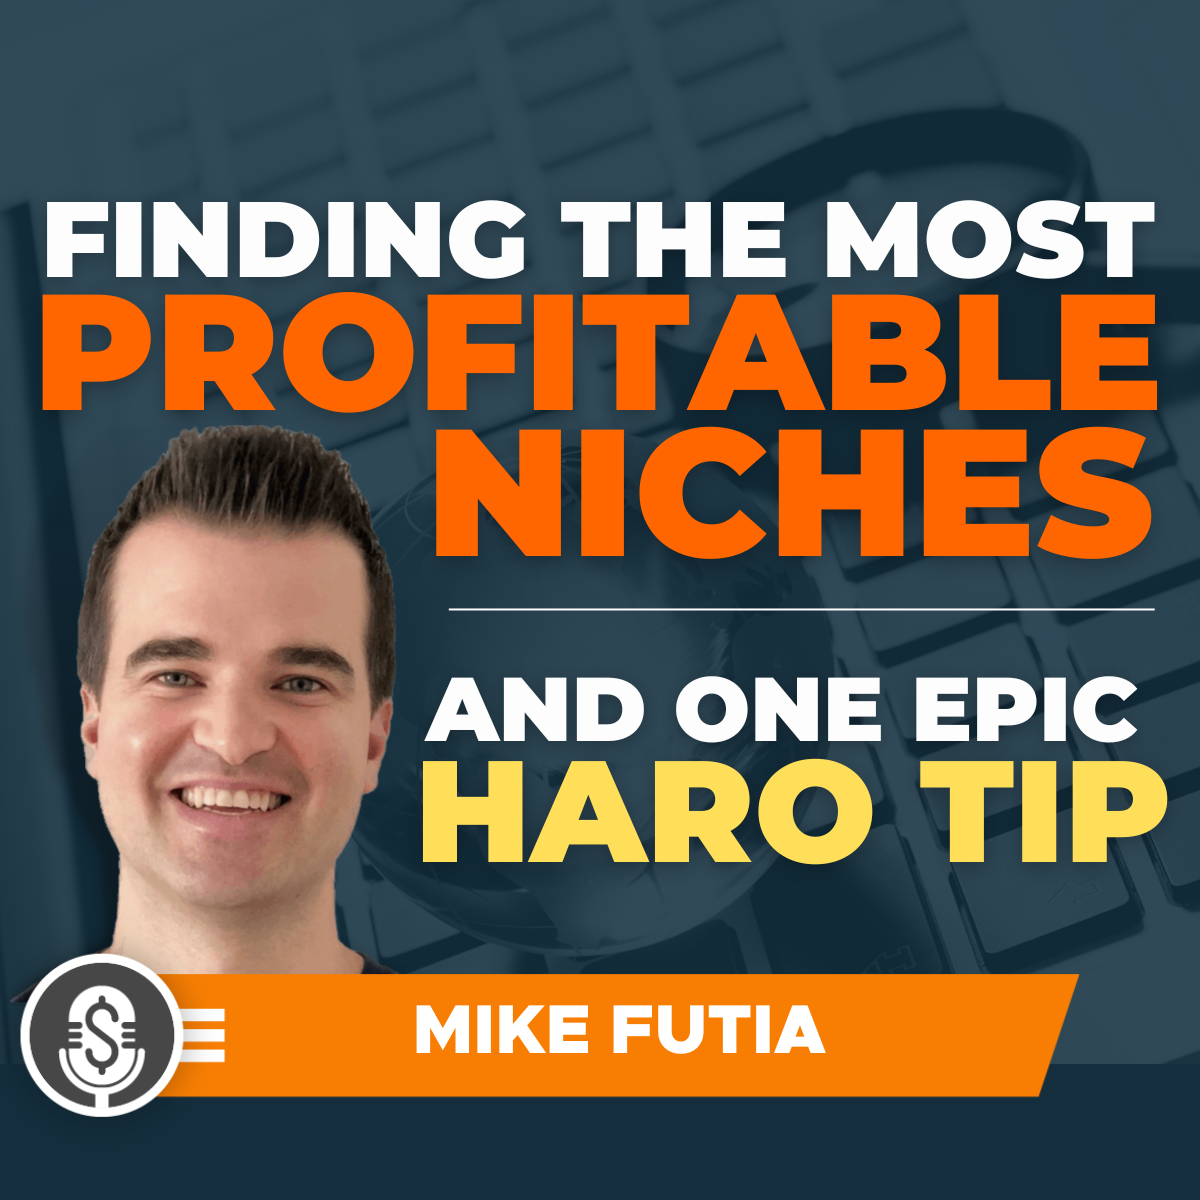 Mike Futia on finding the most profitable niches and one EPIC HARO tip